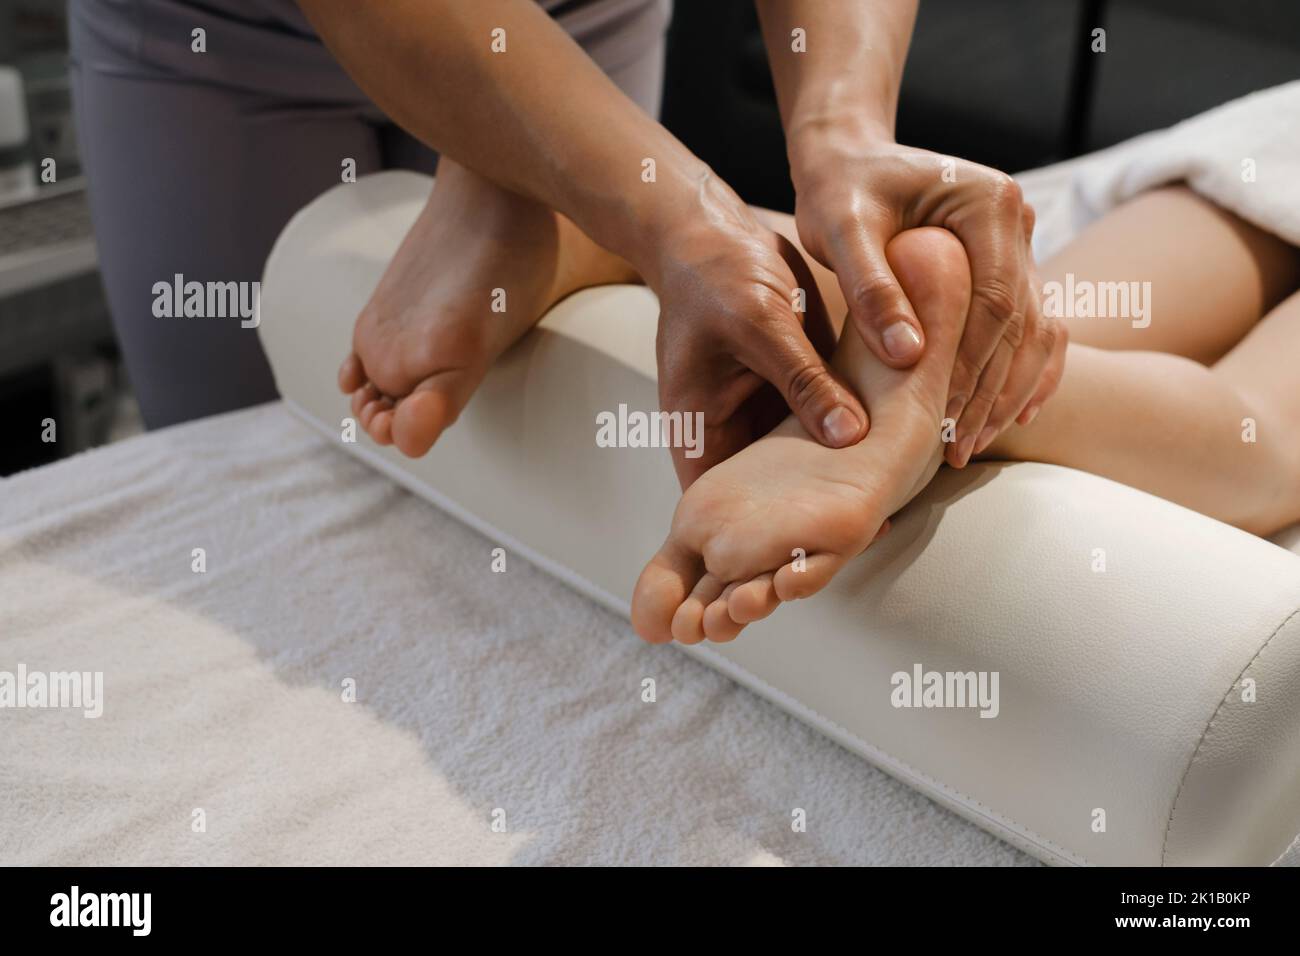 Child Foot massage treatment by professional massage therapist in spa resort. Wellness, stress relief and healthcare concept Stock Photo